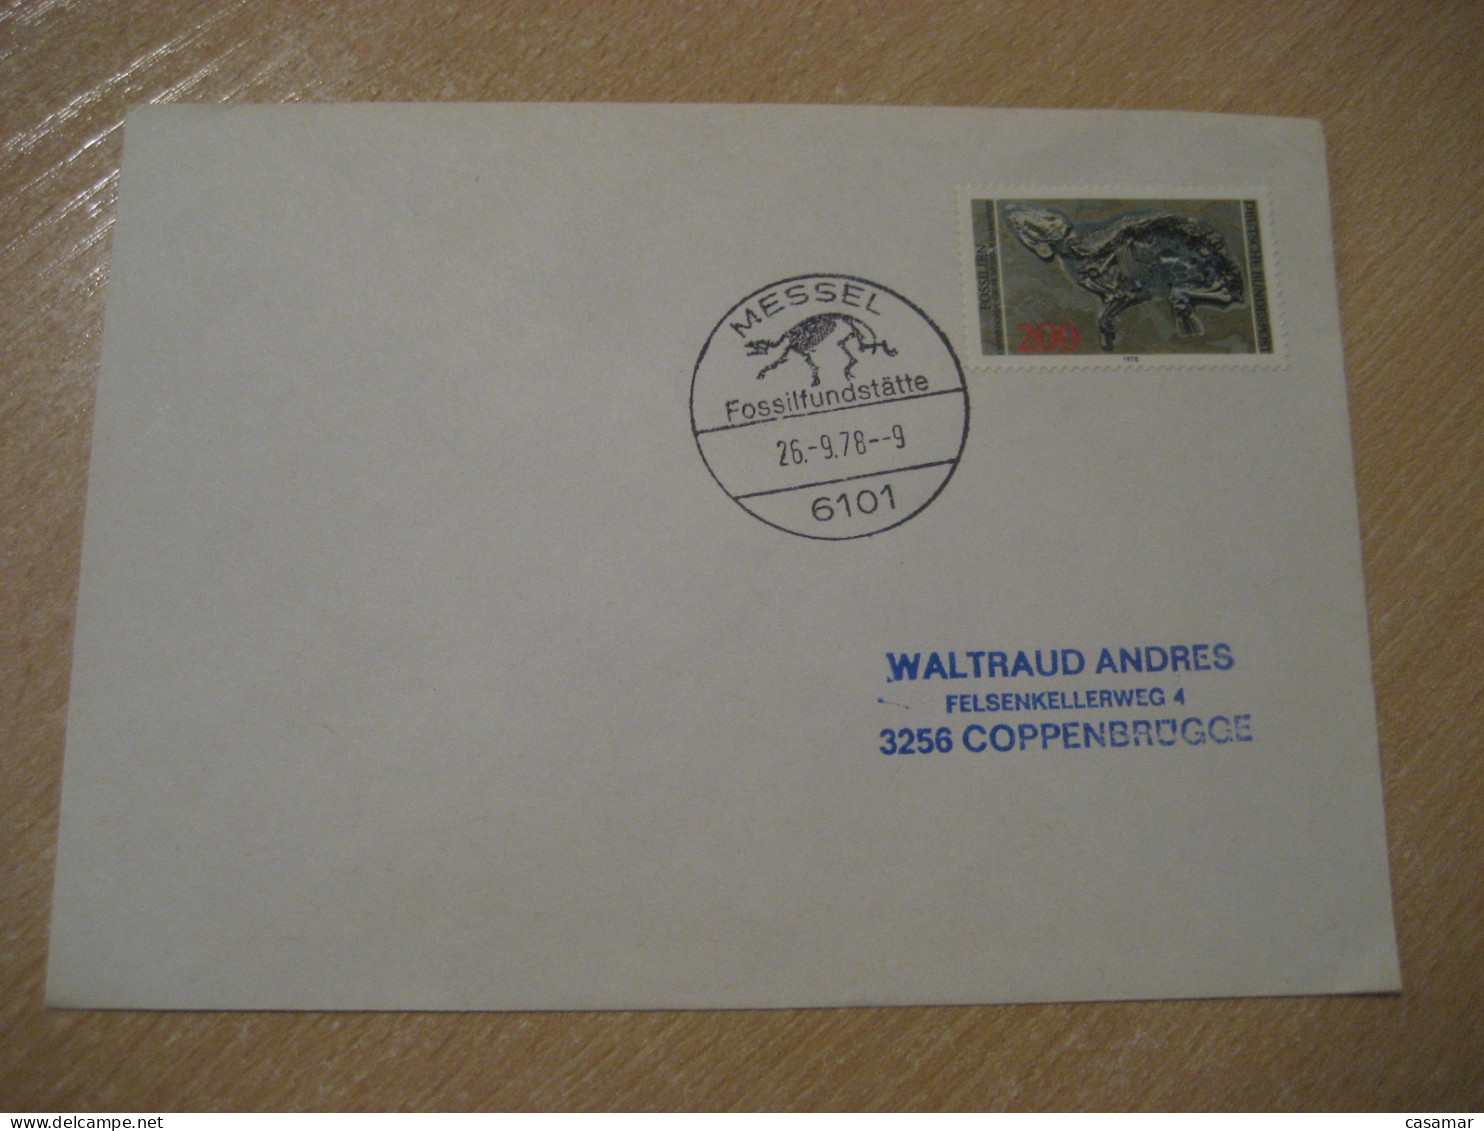 MESSEL 1978 Fossil Deposit Urpferdchen Cancel Cover GERMANY Fossil Fossils Animals Fossiles Geology Geologie - Fossils